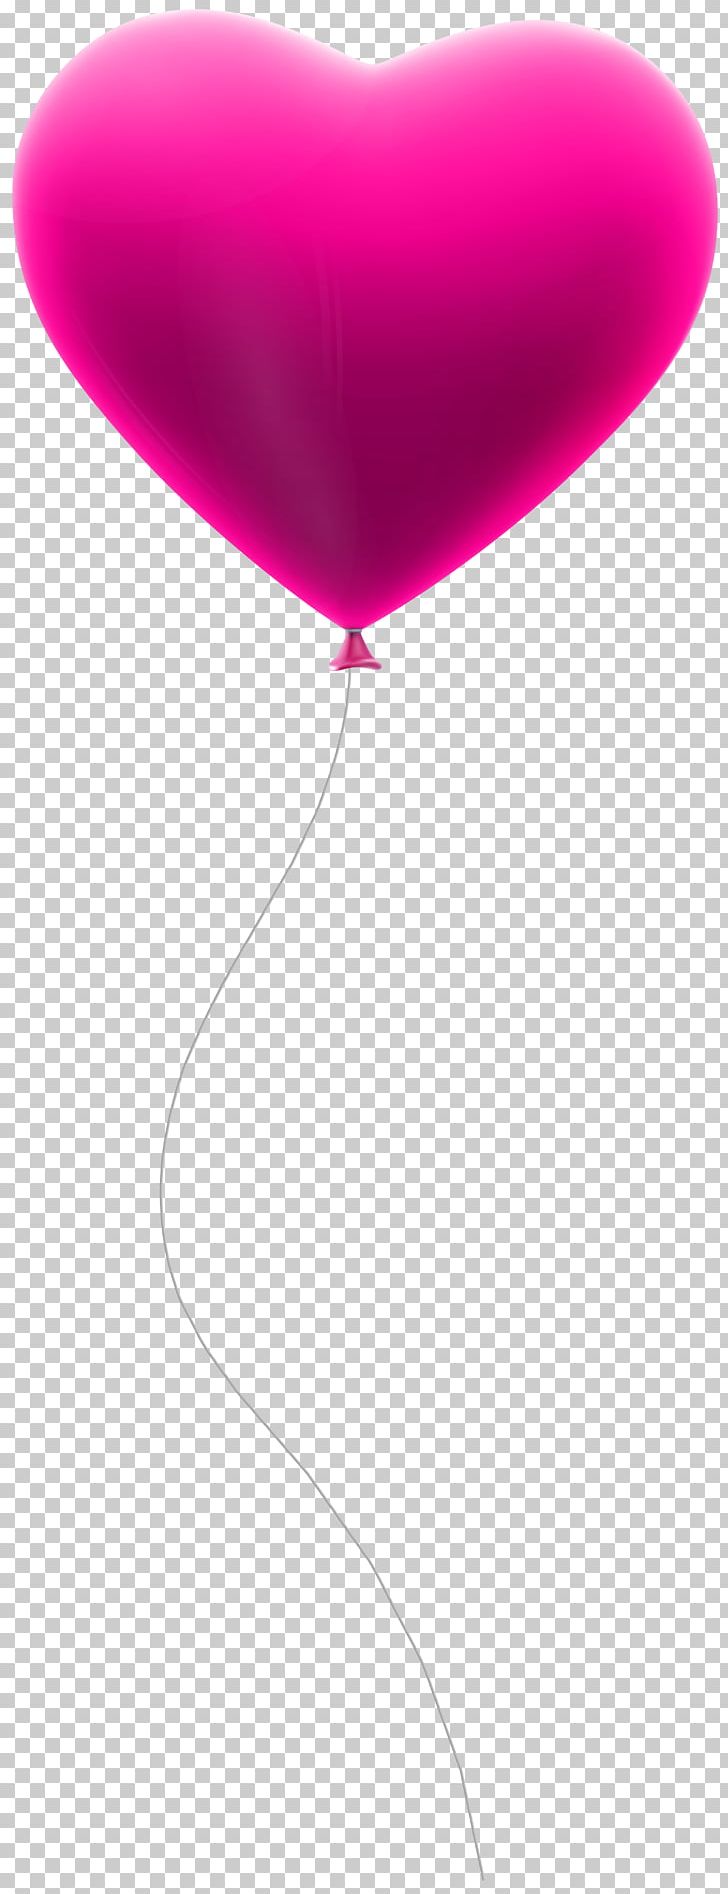 Heart Balloon Pink PNG, Clipart, Balloon, Heart, Love, Magenta, Objects Free PNG Download